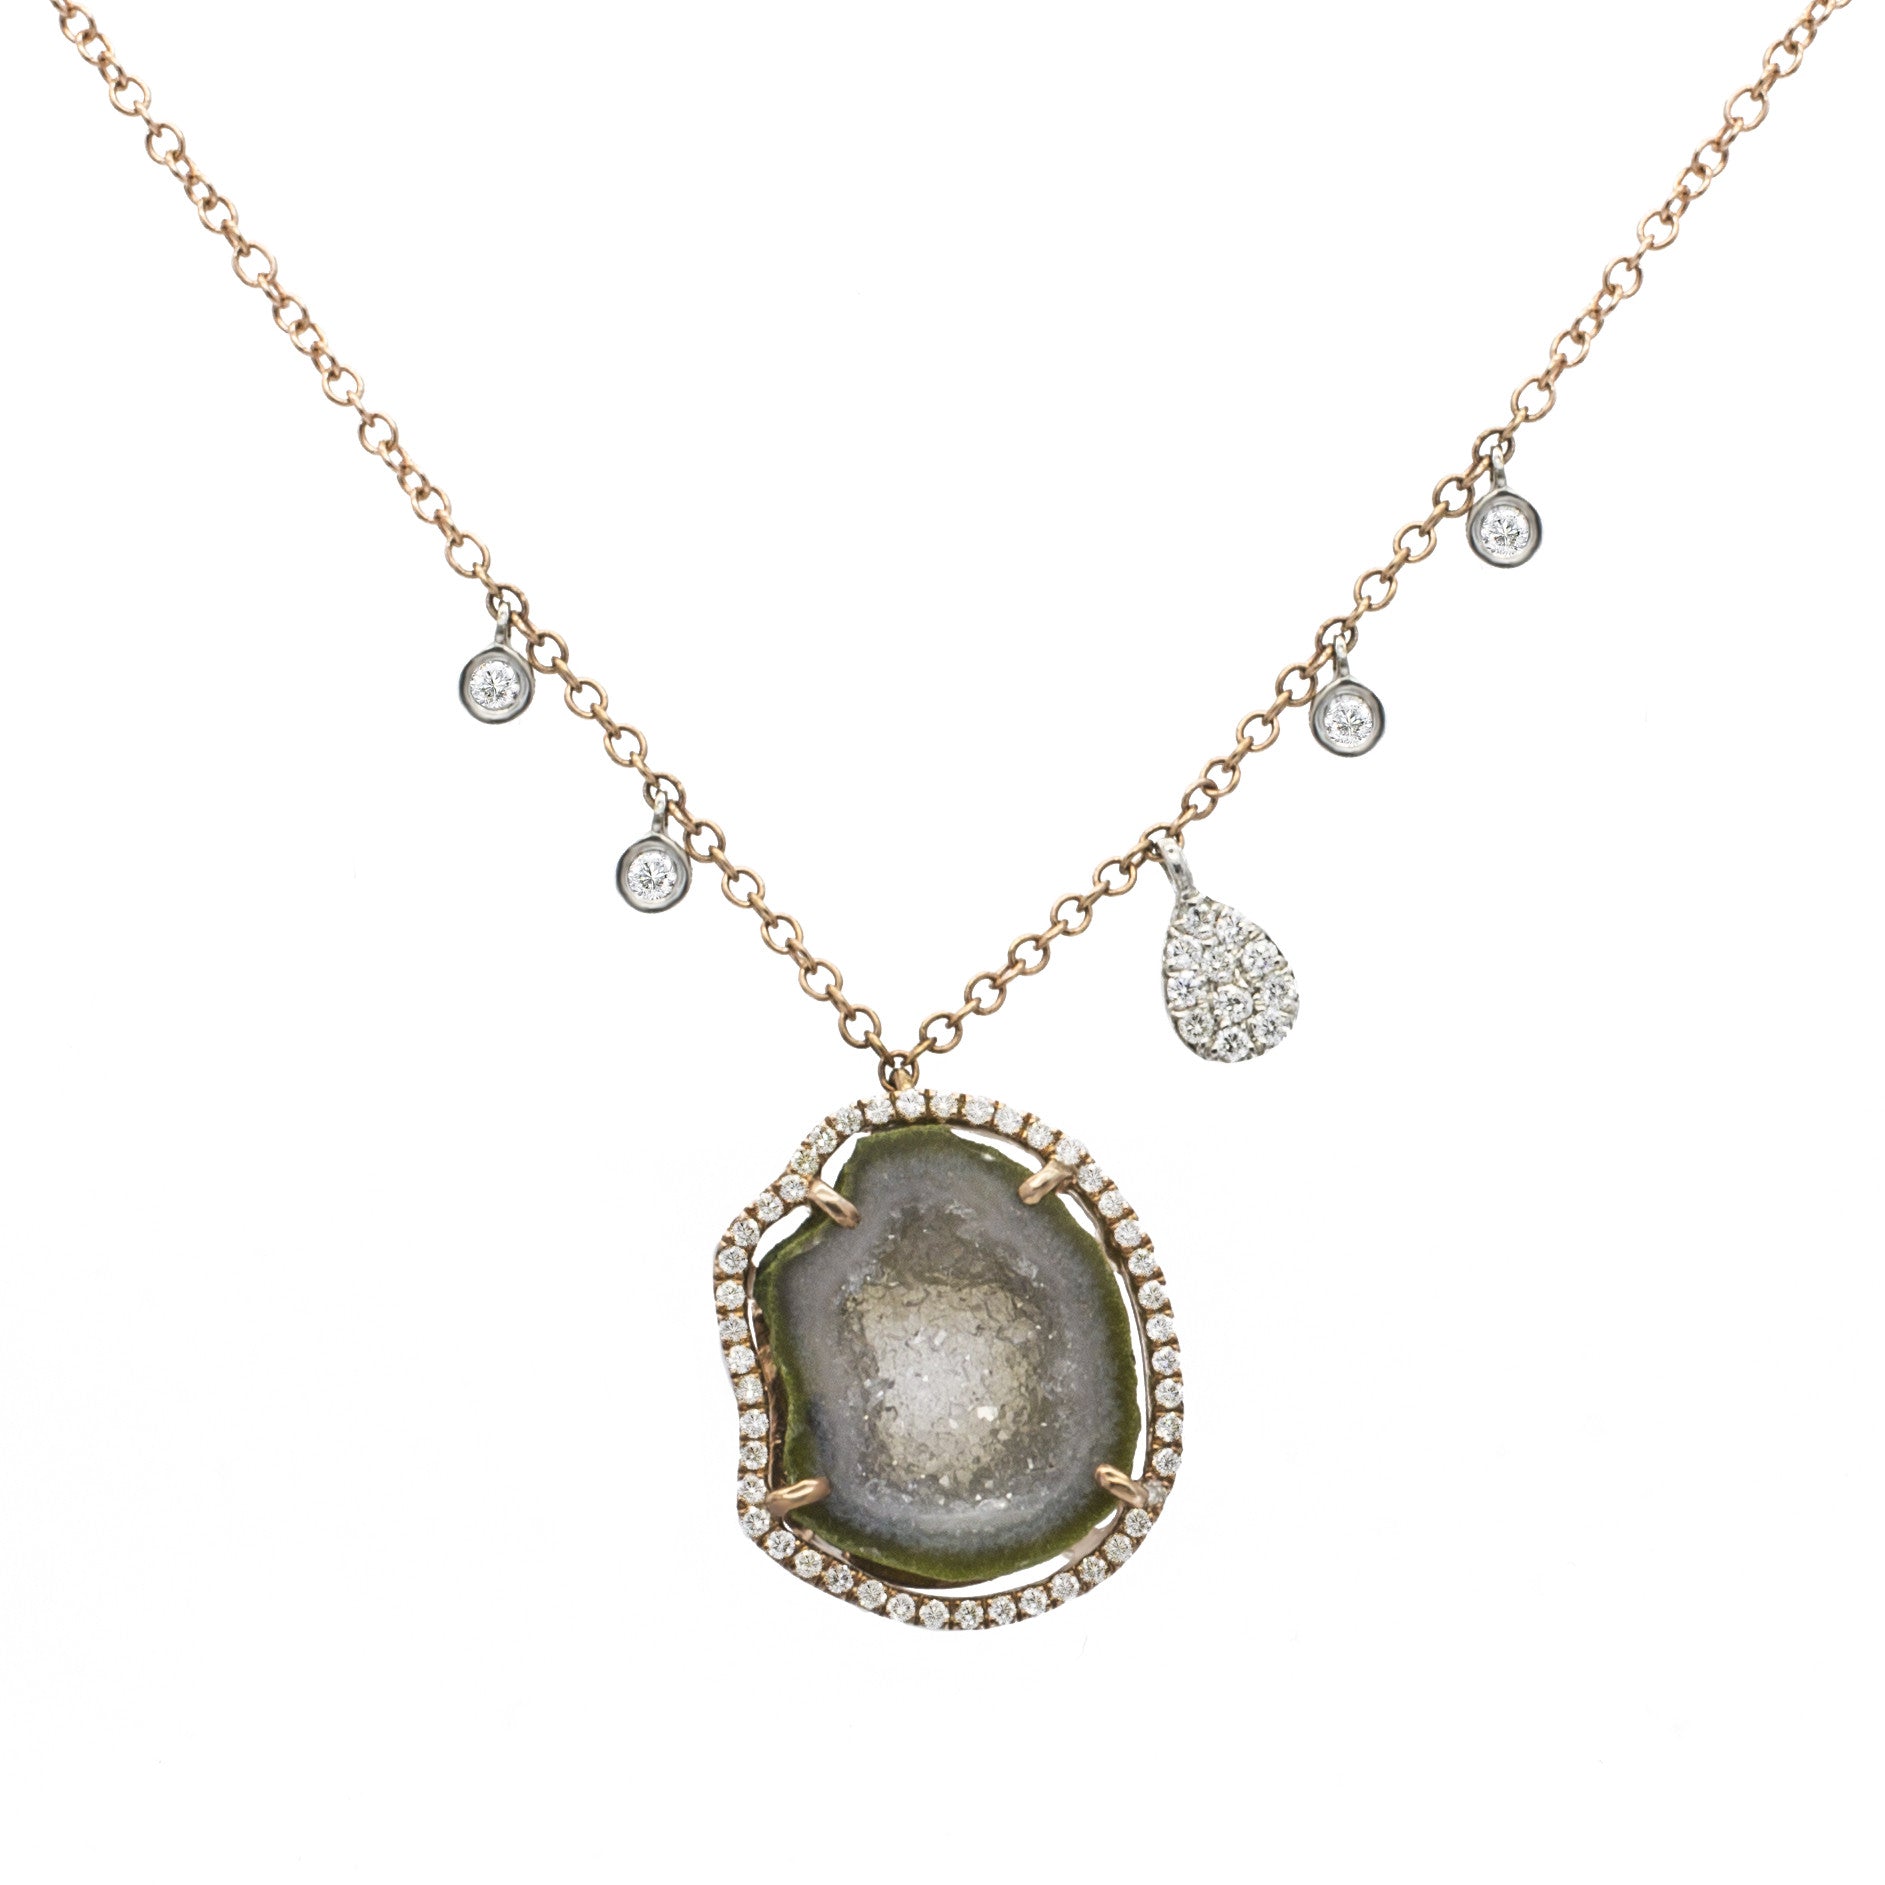 Meira T 14k Geode Diamond Necklace with Off-Centered Charms